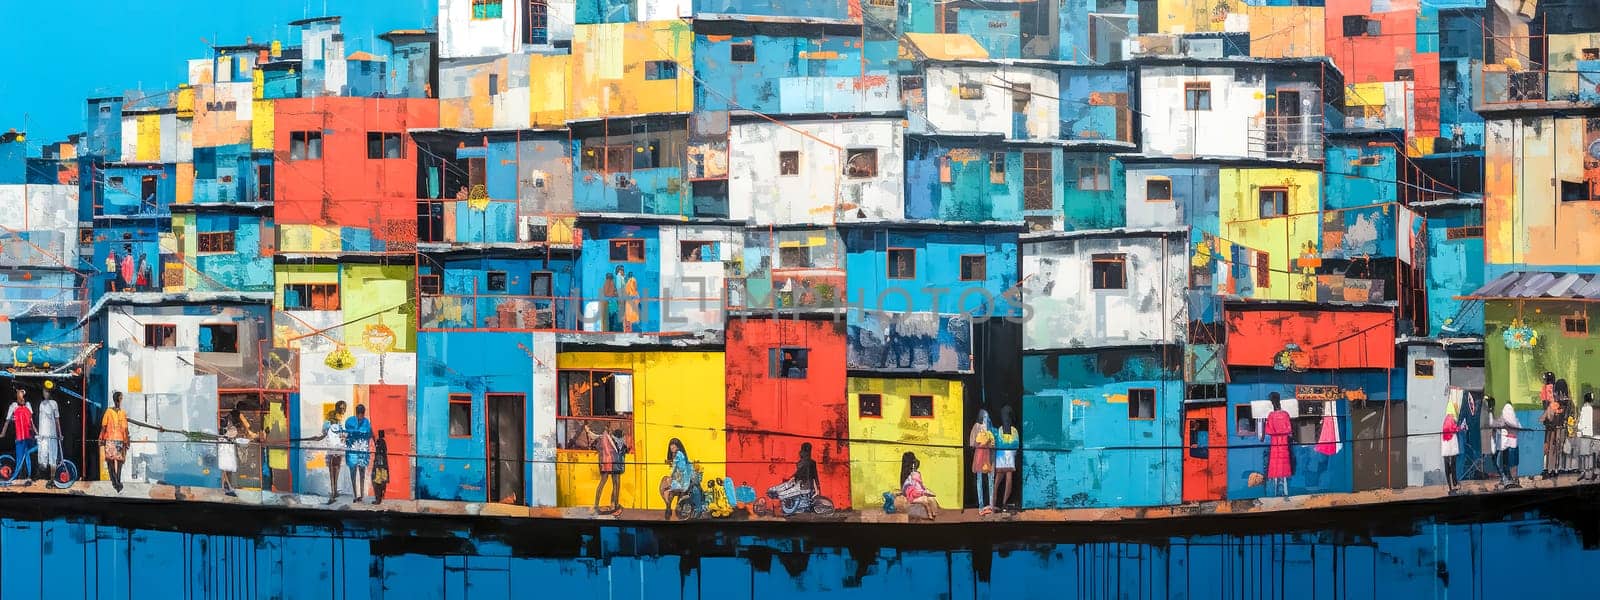 A vivid riverside favela in South America with a patchwork of colorful houses reflecting on the water, people engaging in daily life. banner